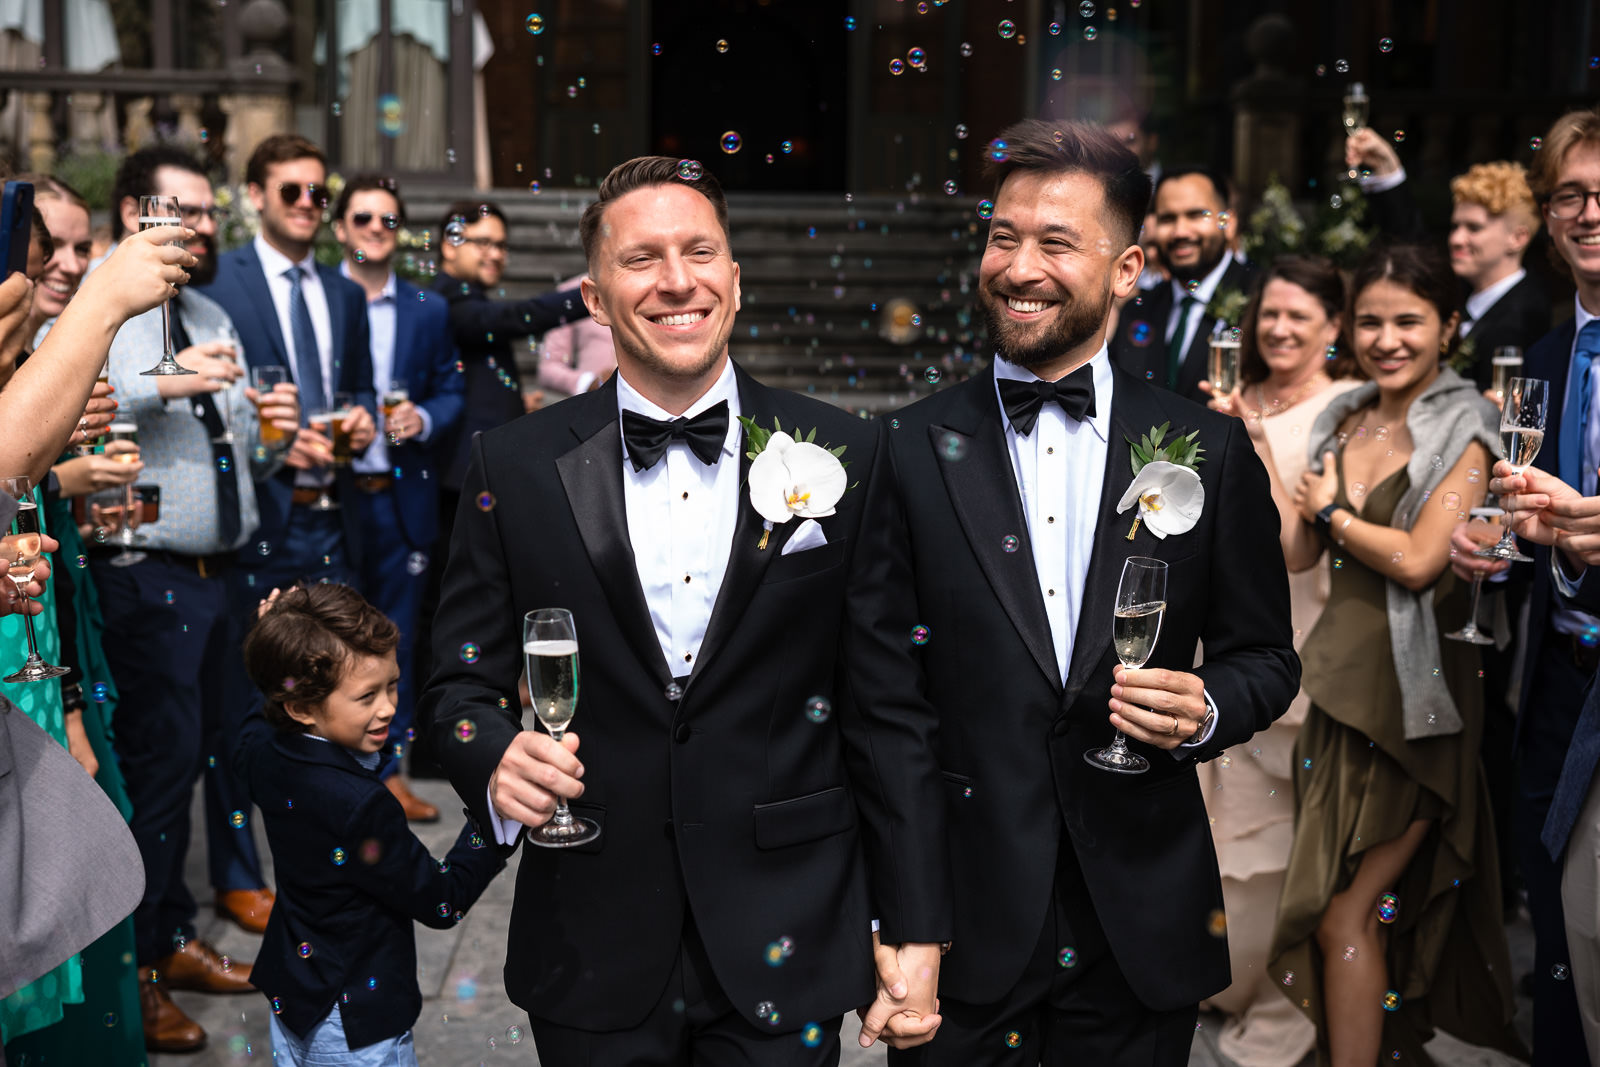 Grooms enter the reception with champagne in their hand and bubbles in the air